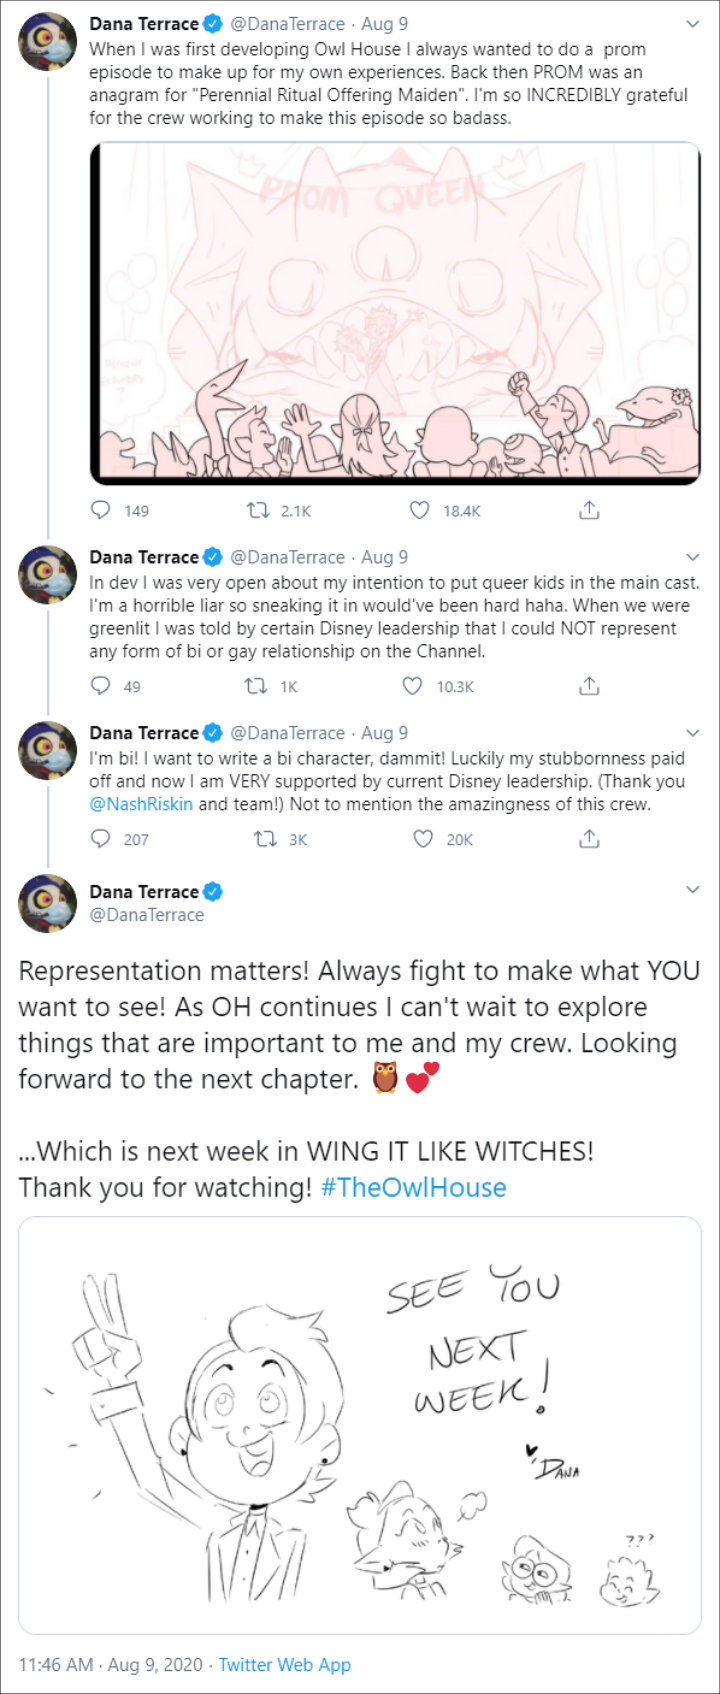 Series creator Dana Terrace talked on her Twitter account about creating Luz Nozeda for the show